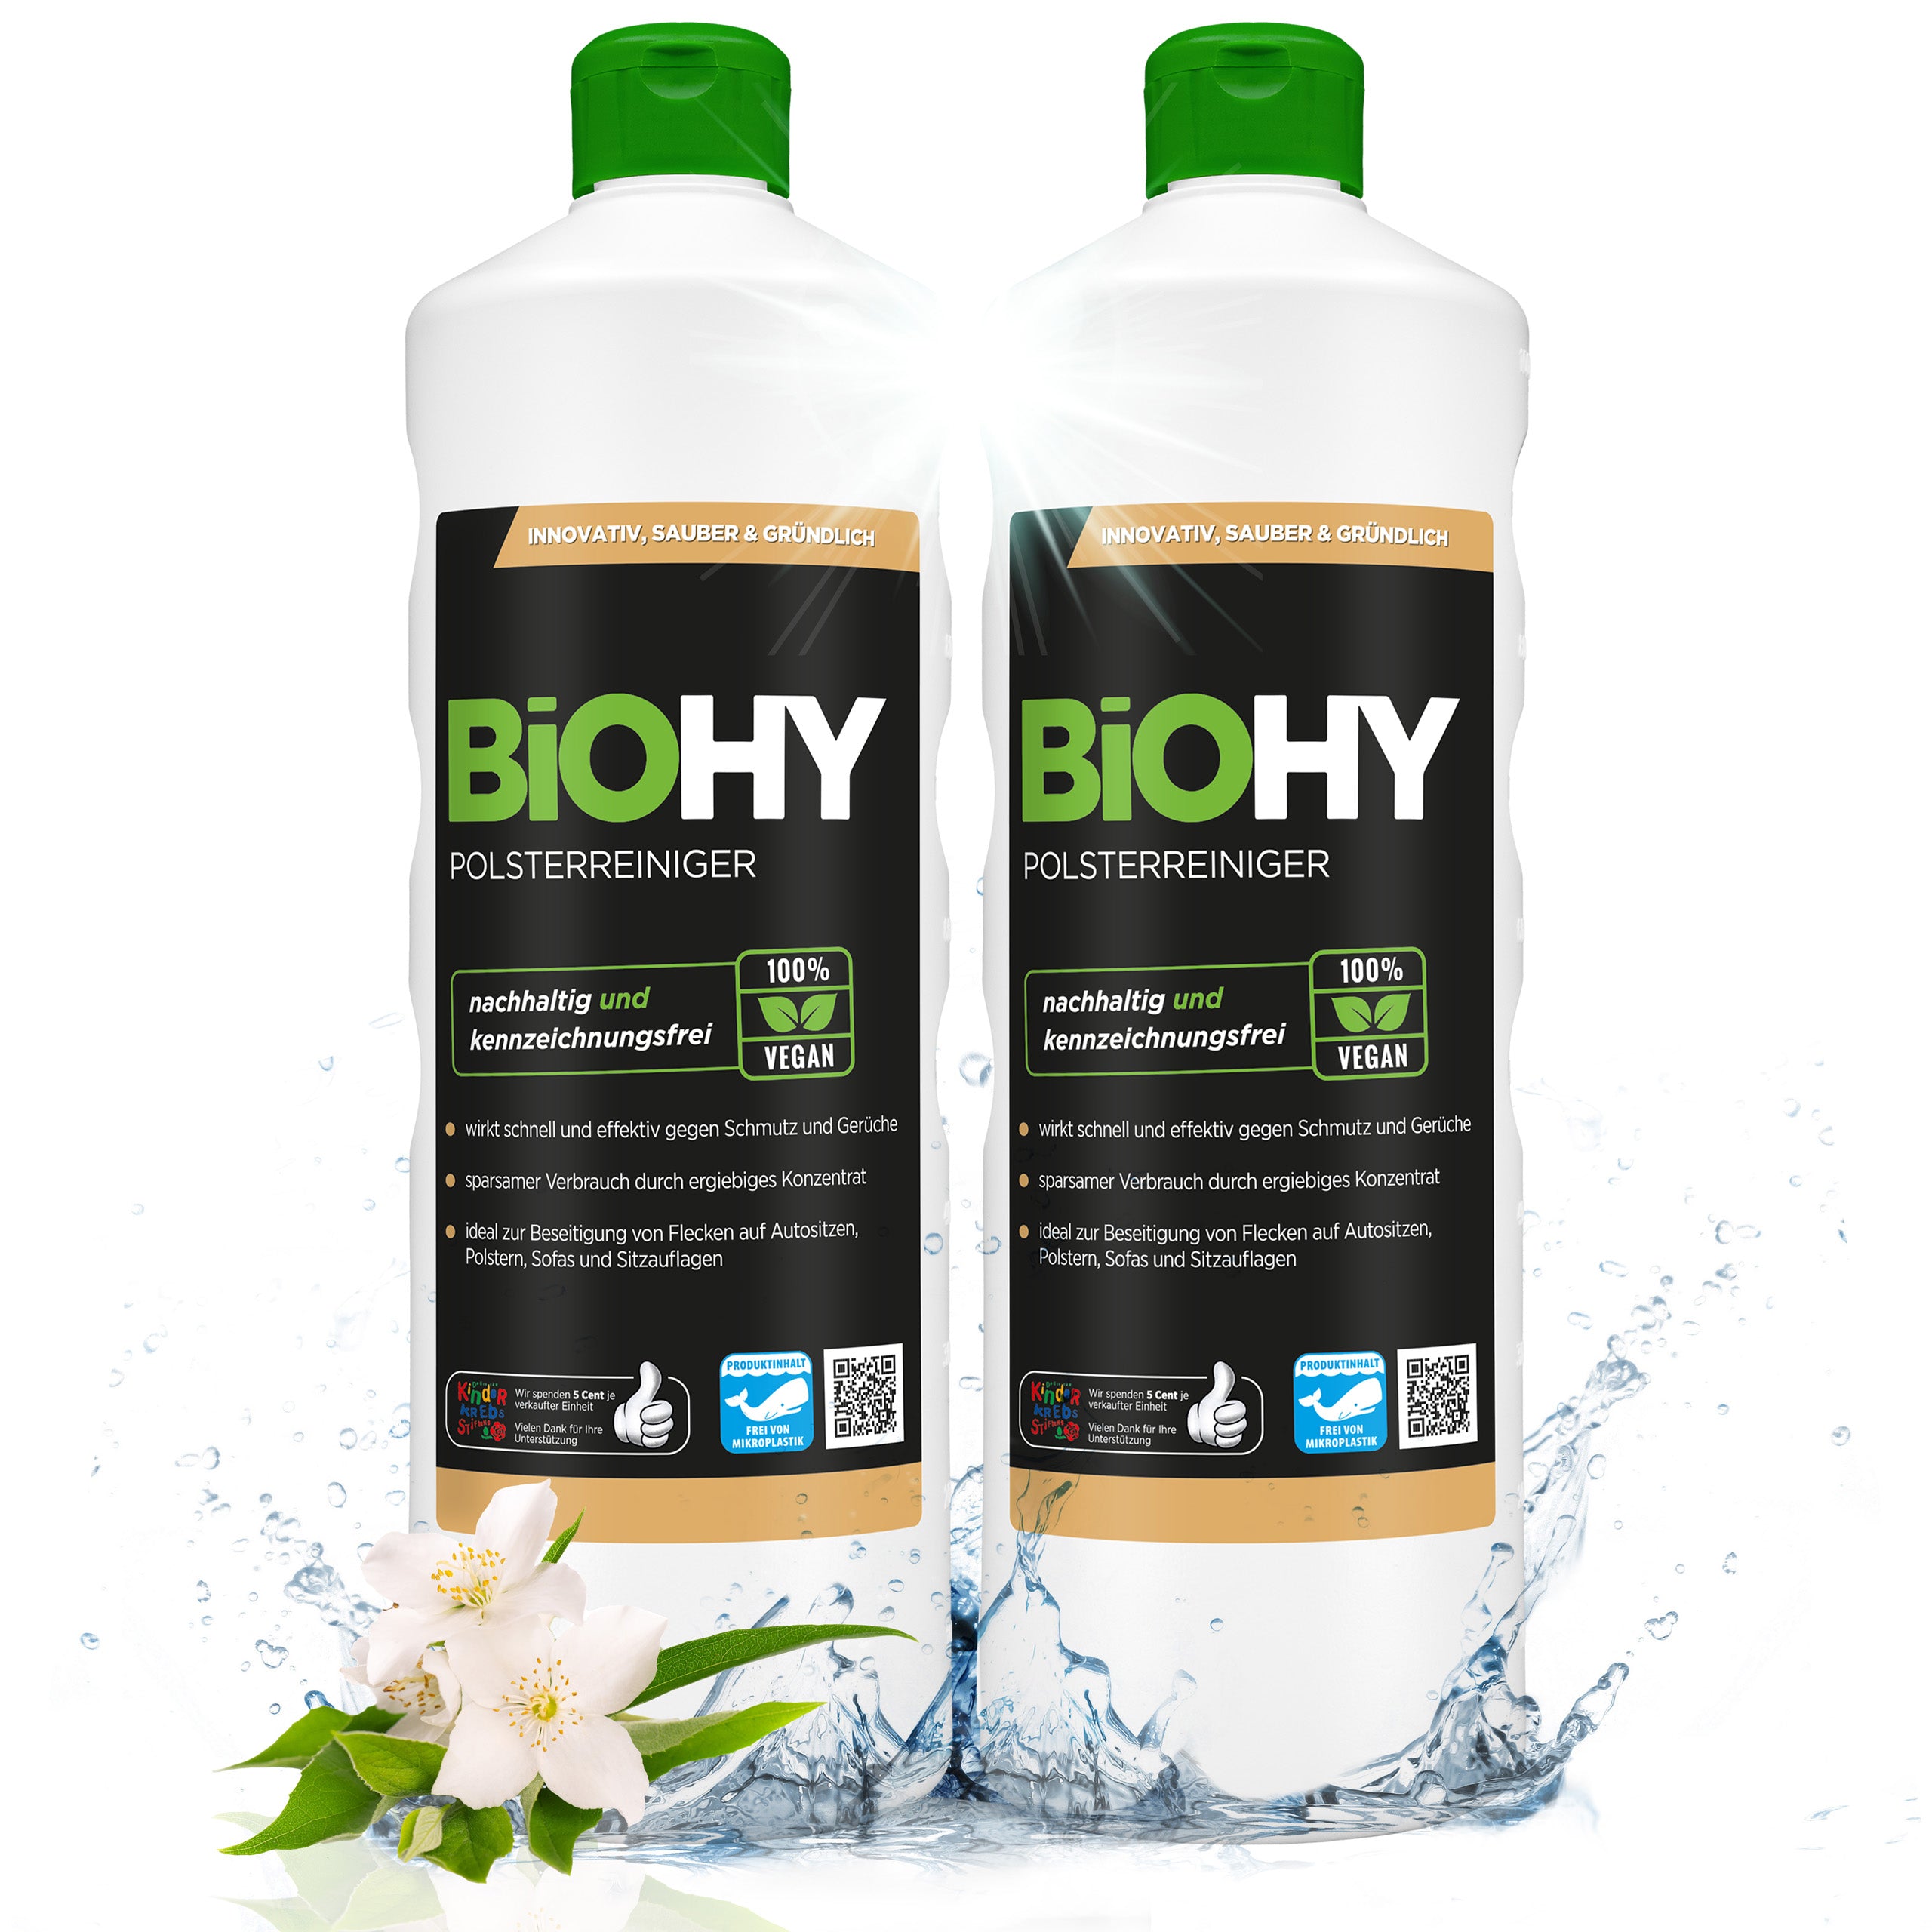 BiOHY upholstery cleaner, textile cleaner, upholstery cleaning agent, sofa cleaner